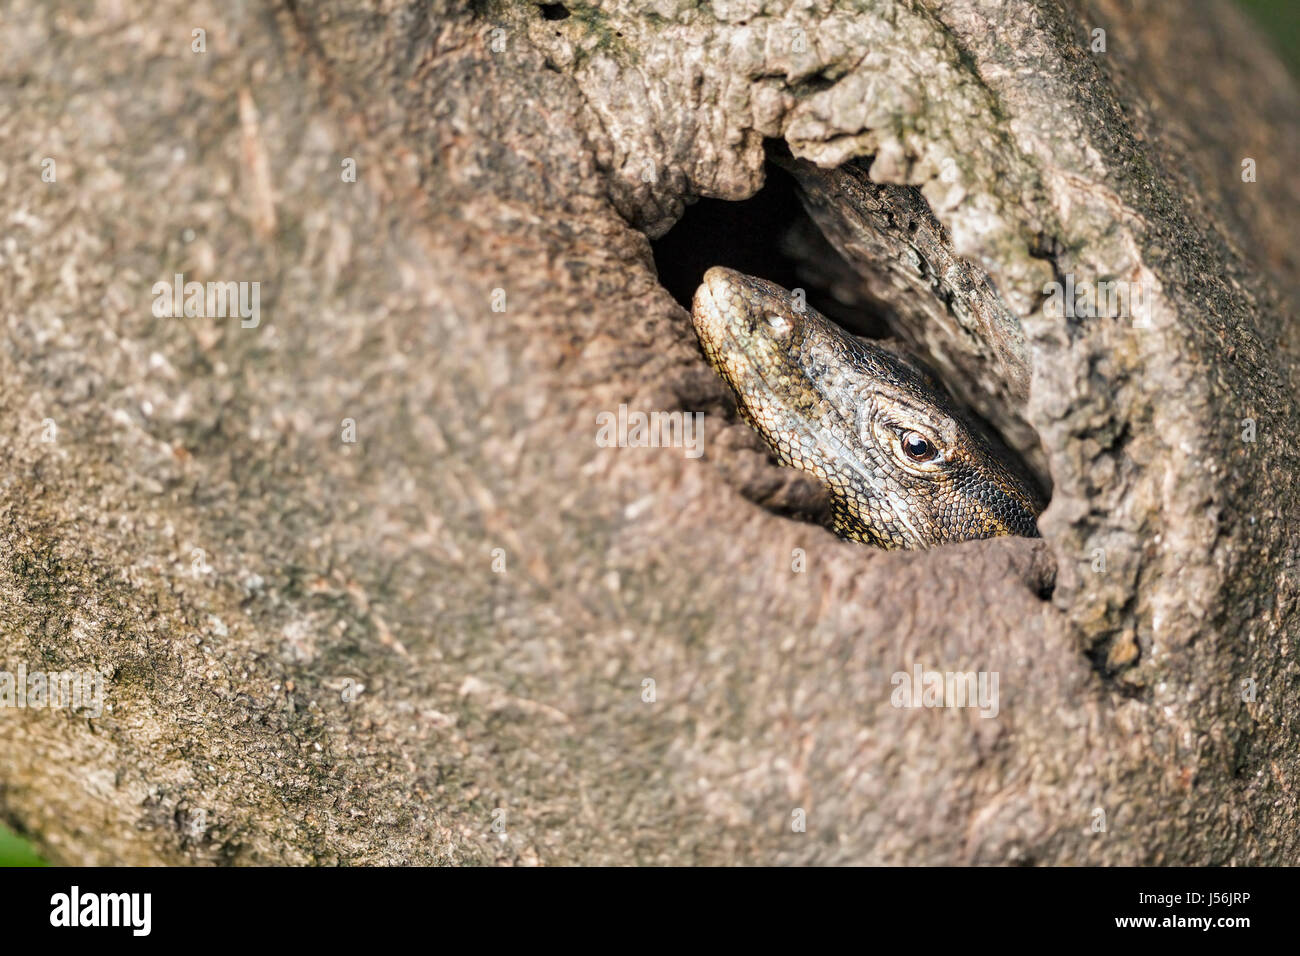 Adult Water Monitor Lizard (Varanus salvator) inside the hollow of a mangrove tree trunk next to a river, Singapore Stock Photo